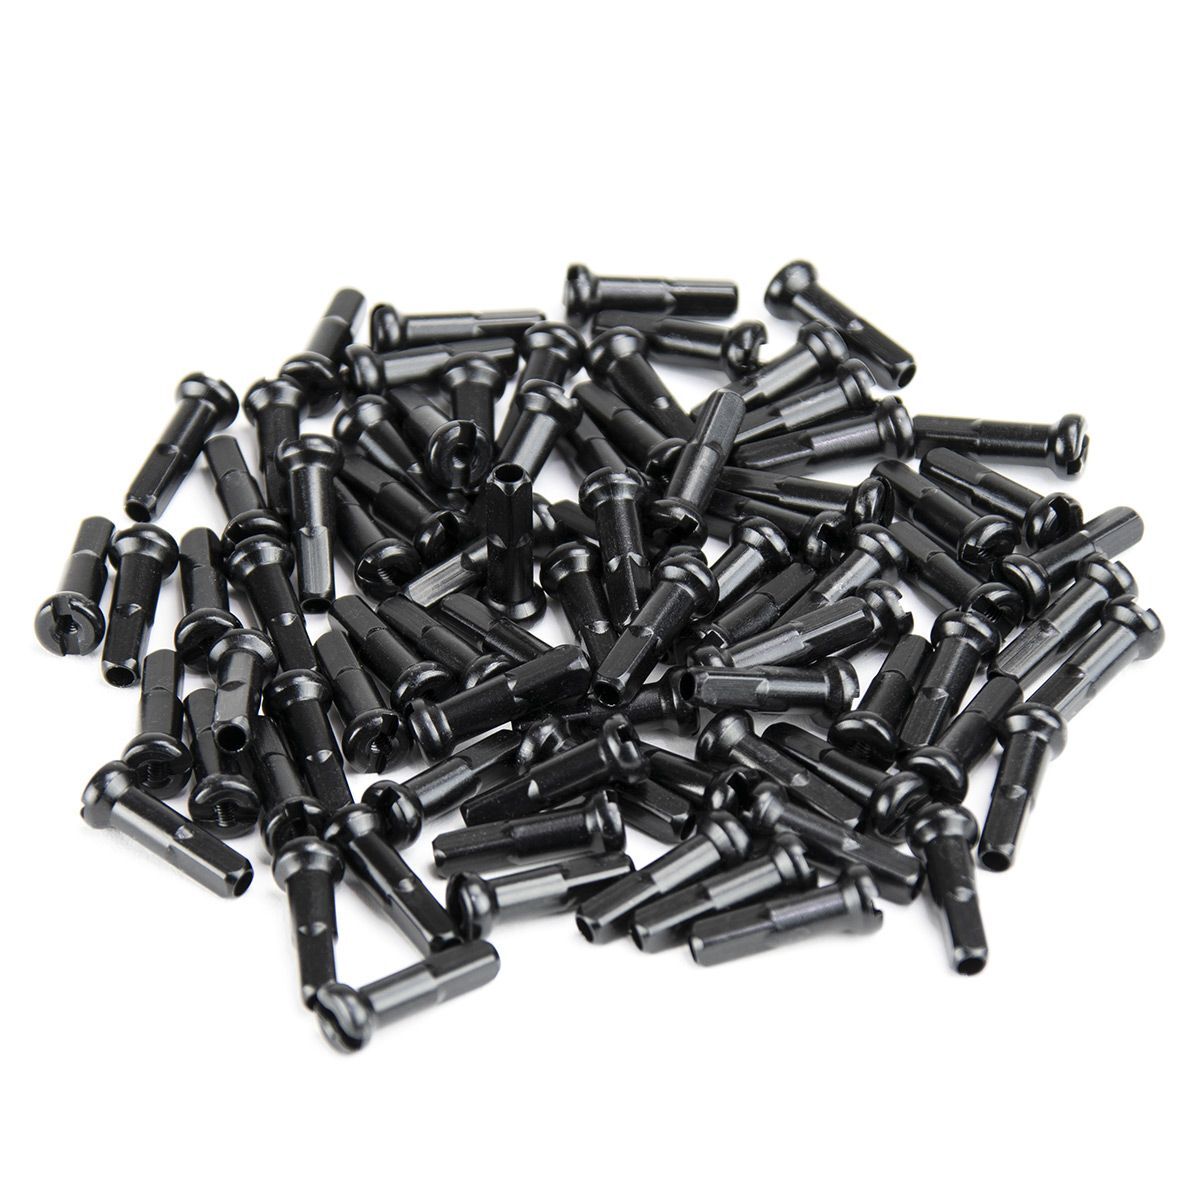 Sentence with product name: A pile of small black Excess Alloy Nipples 80 Pack scattered on a white background, each 16mm in length.